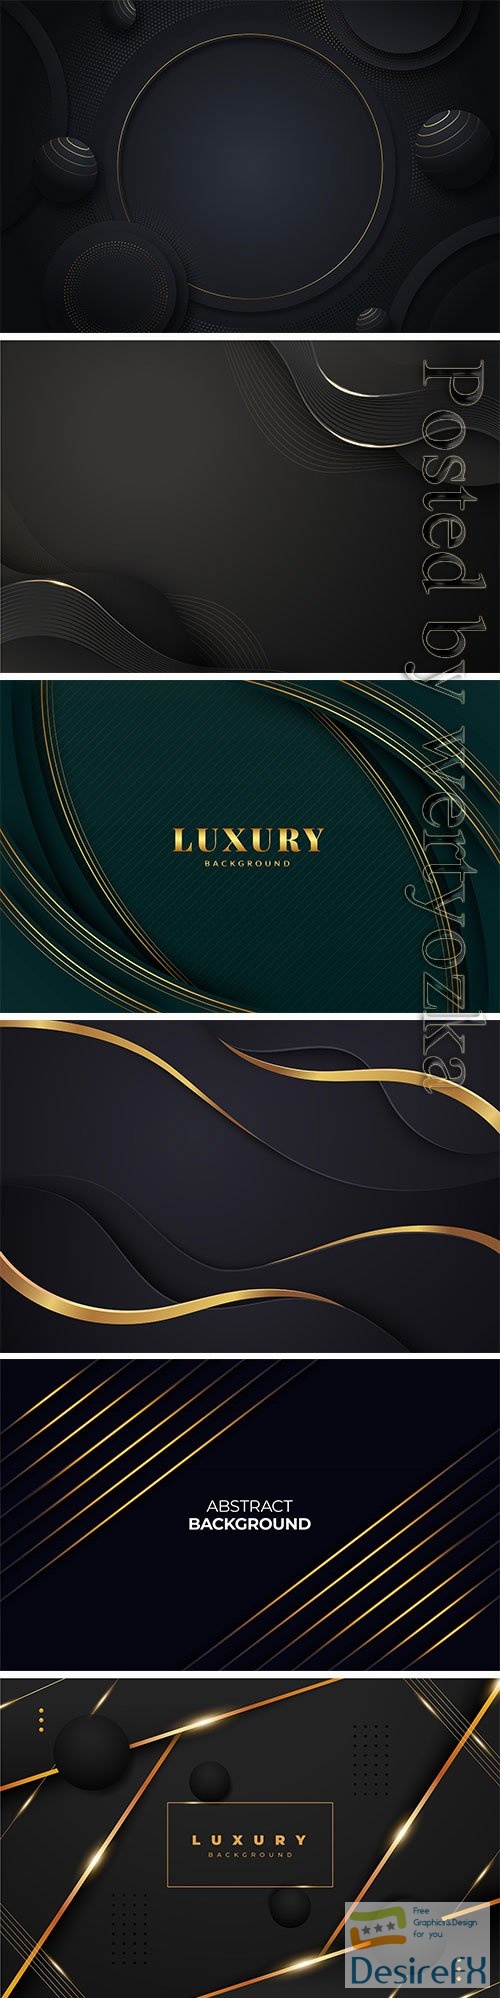 Paper style luxury vector background